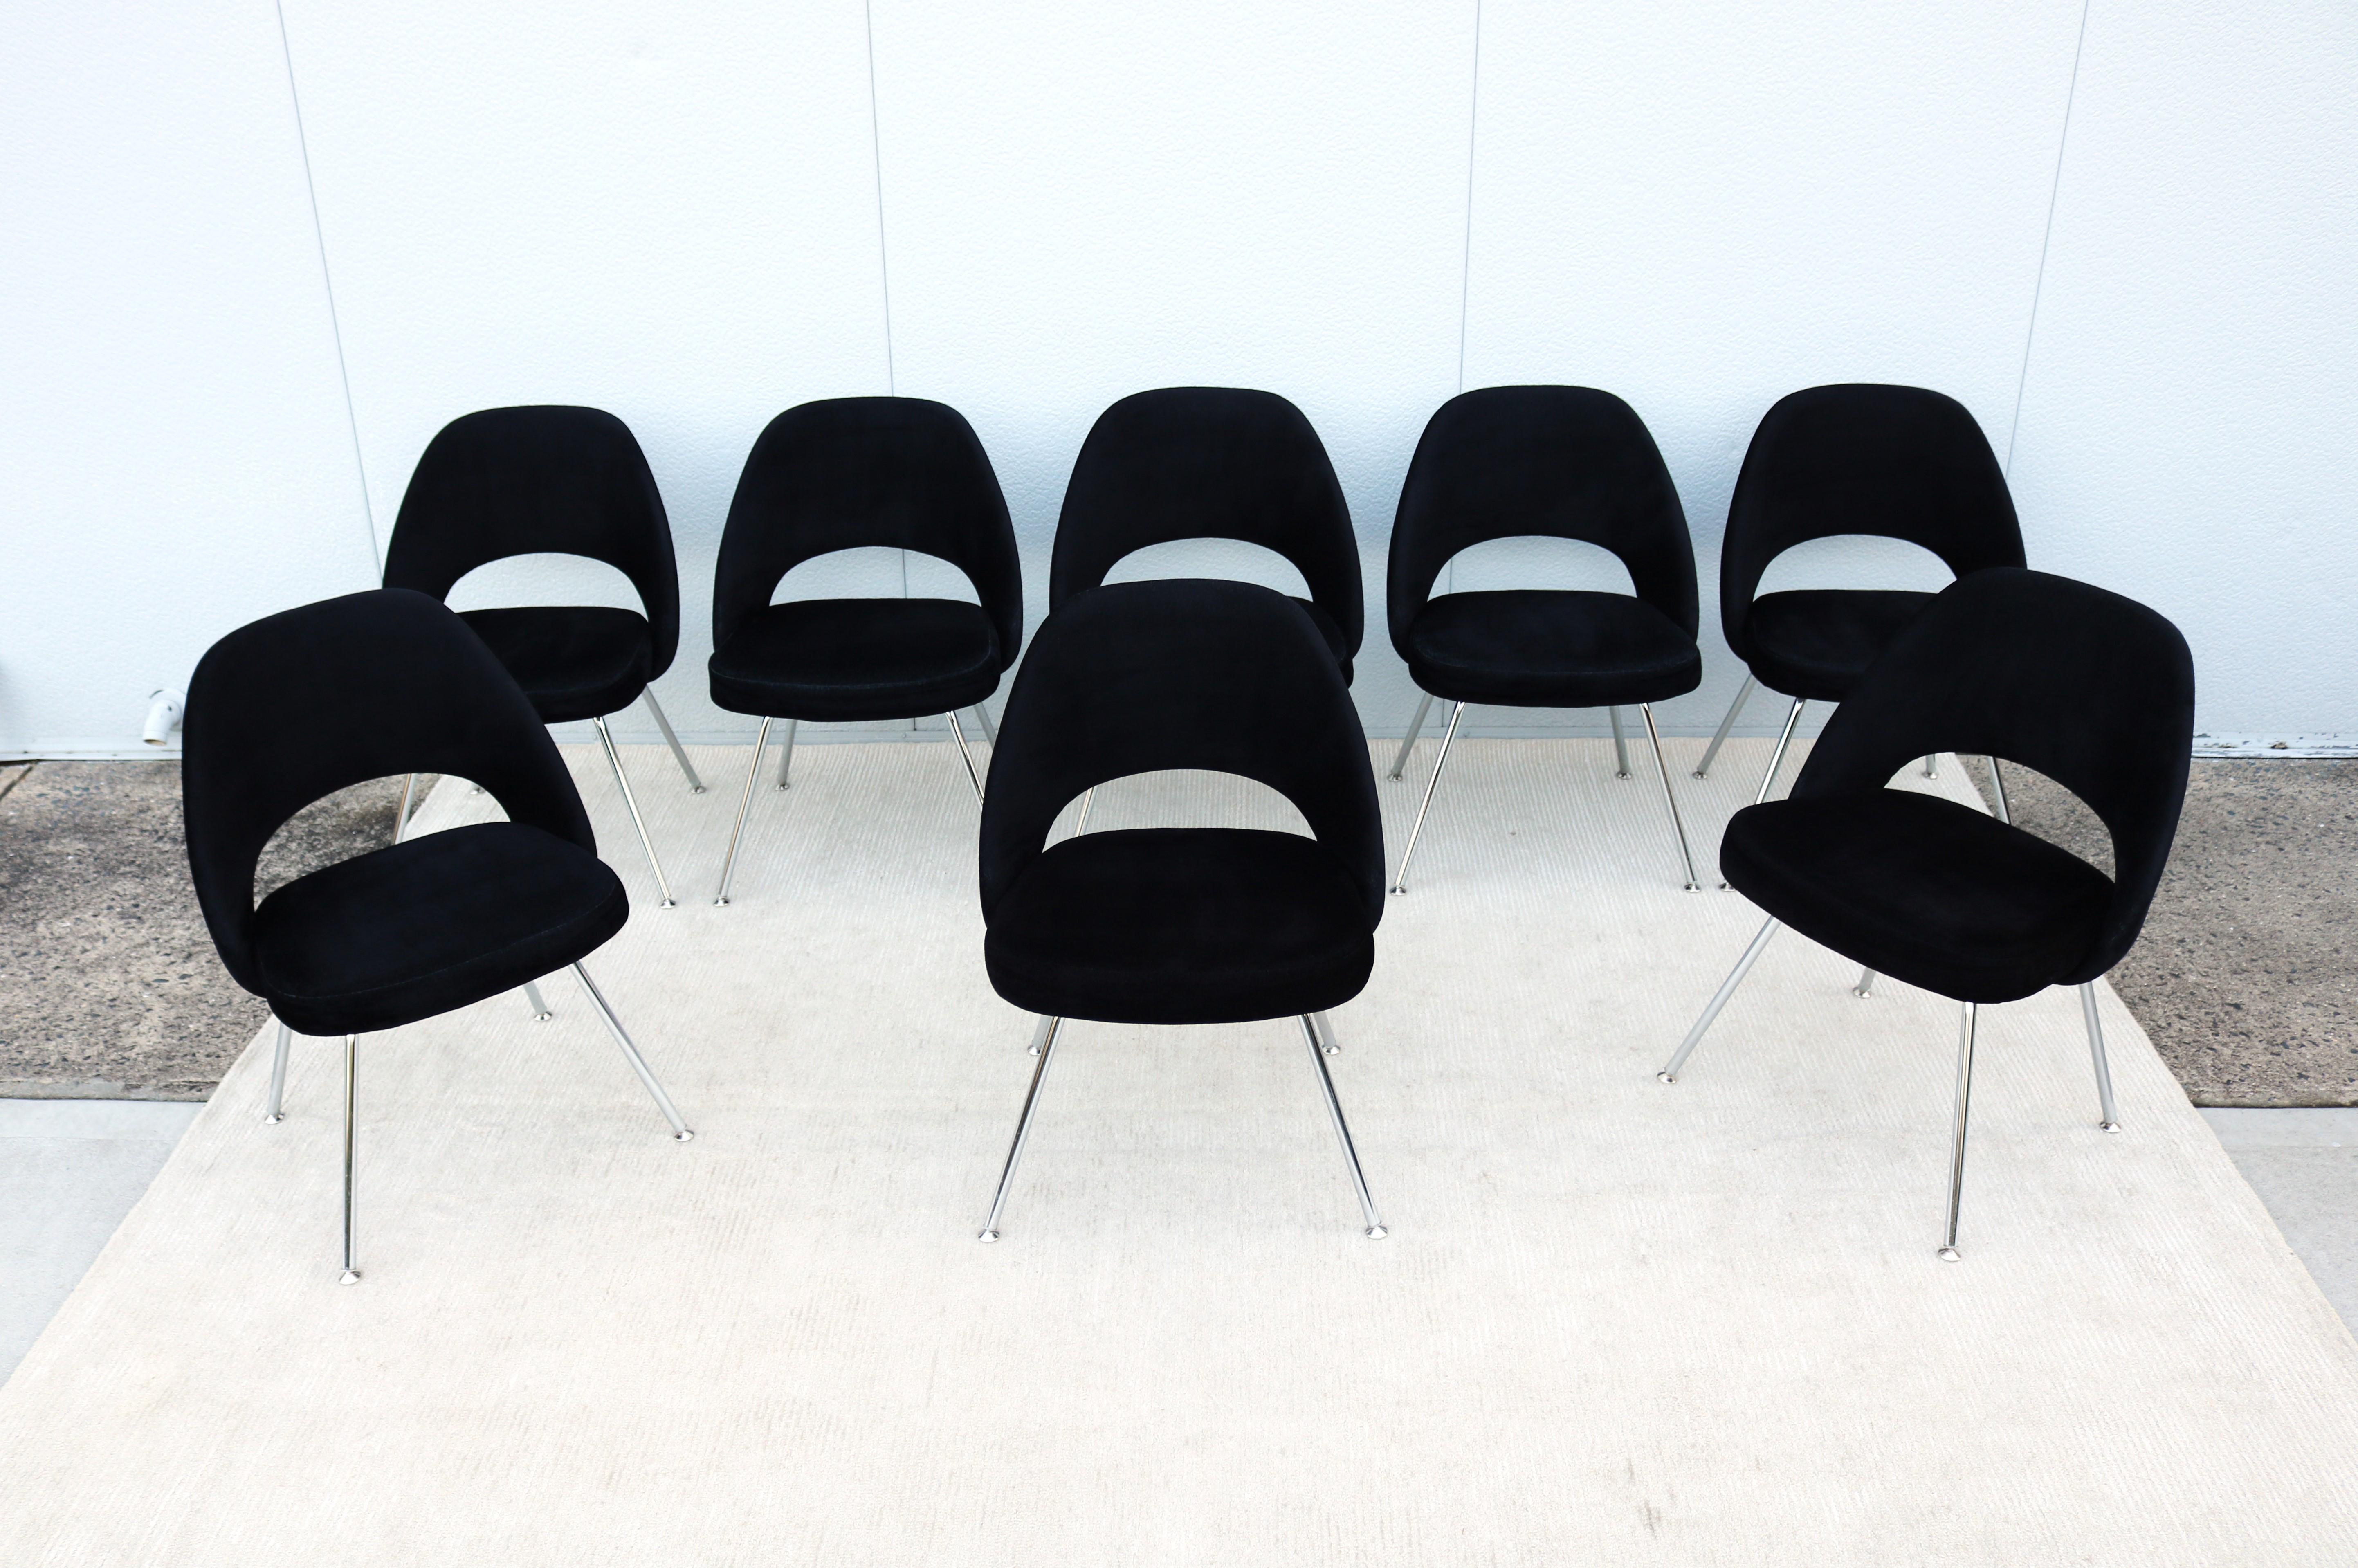 American Mid-Century Modern Eero Saarinen for Knoll Executive Armless Chairs - Set of 8 For Sale